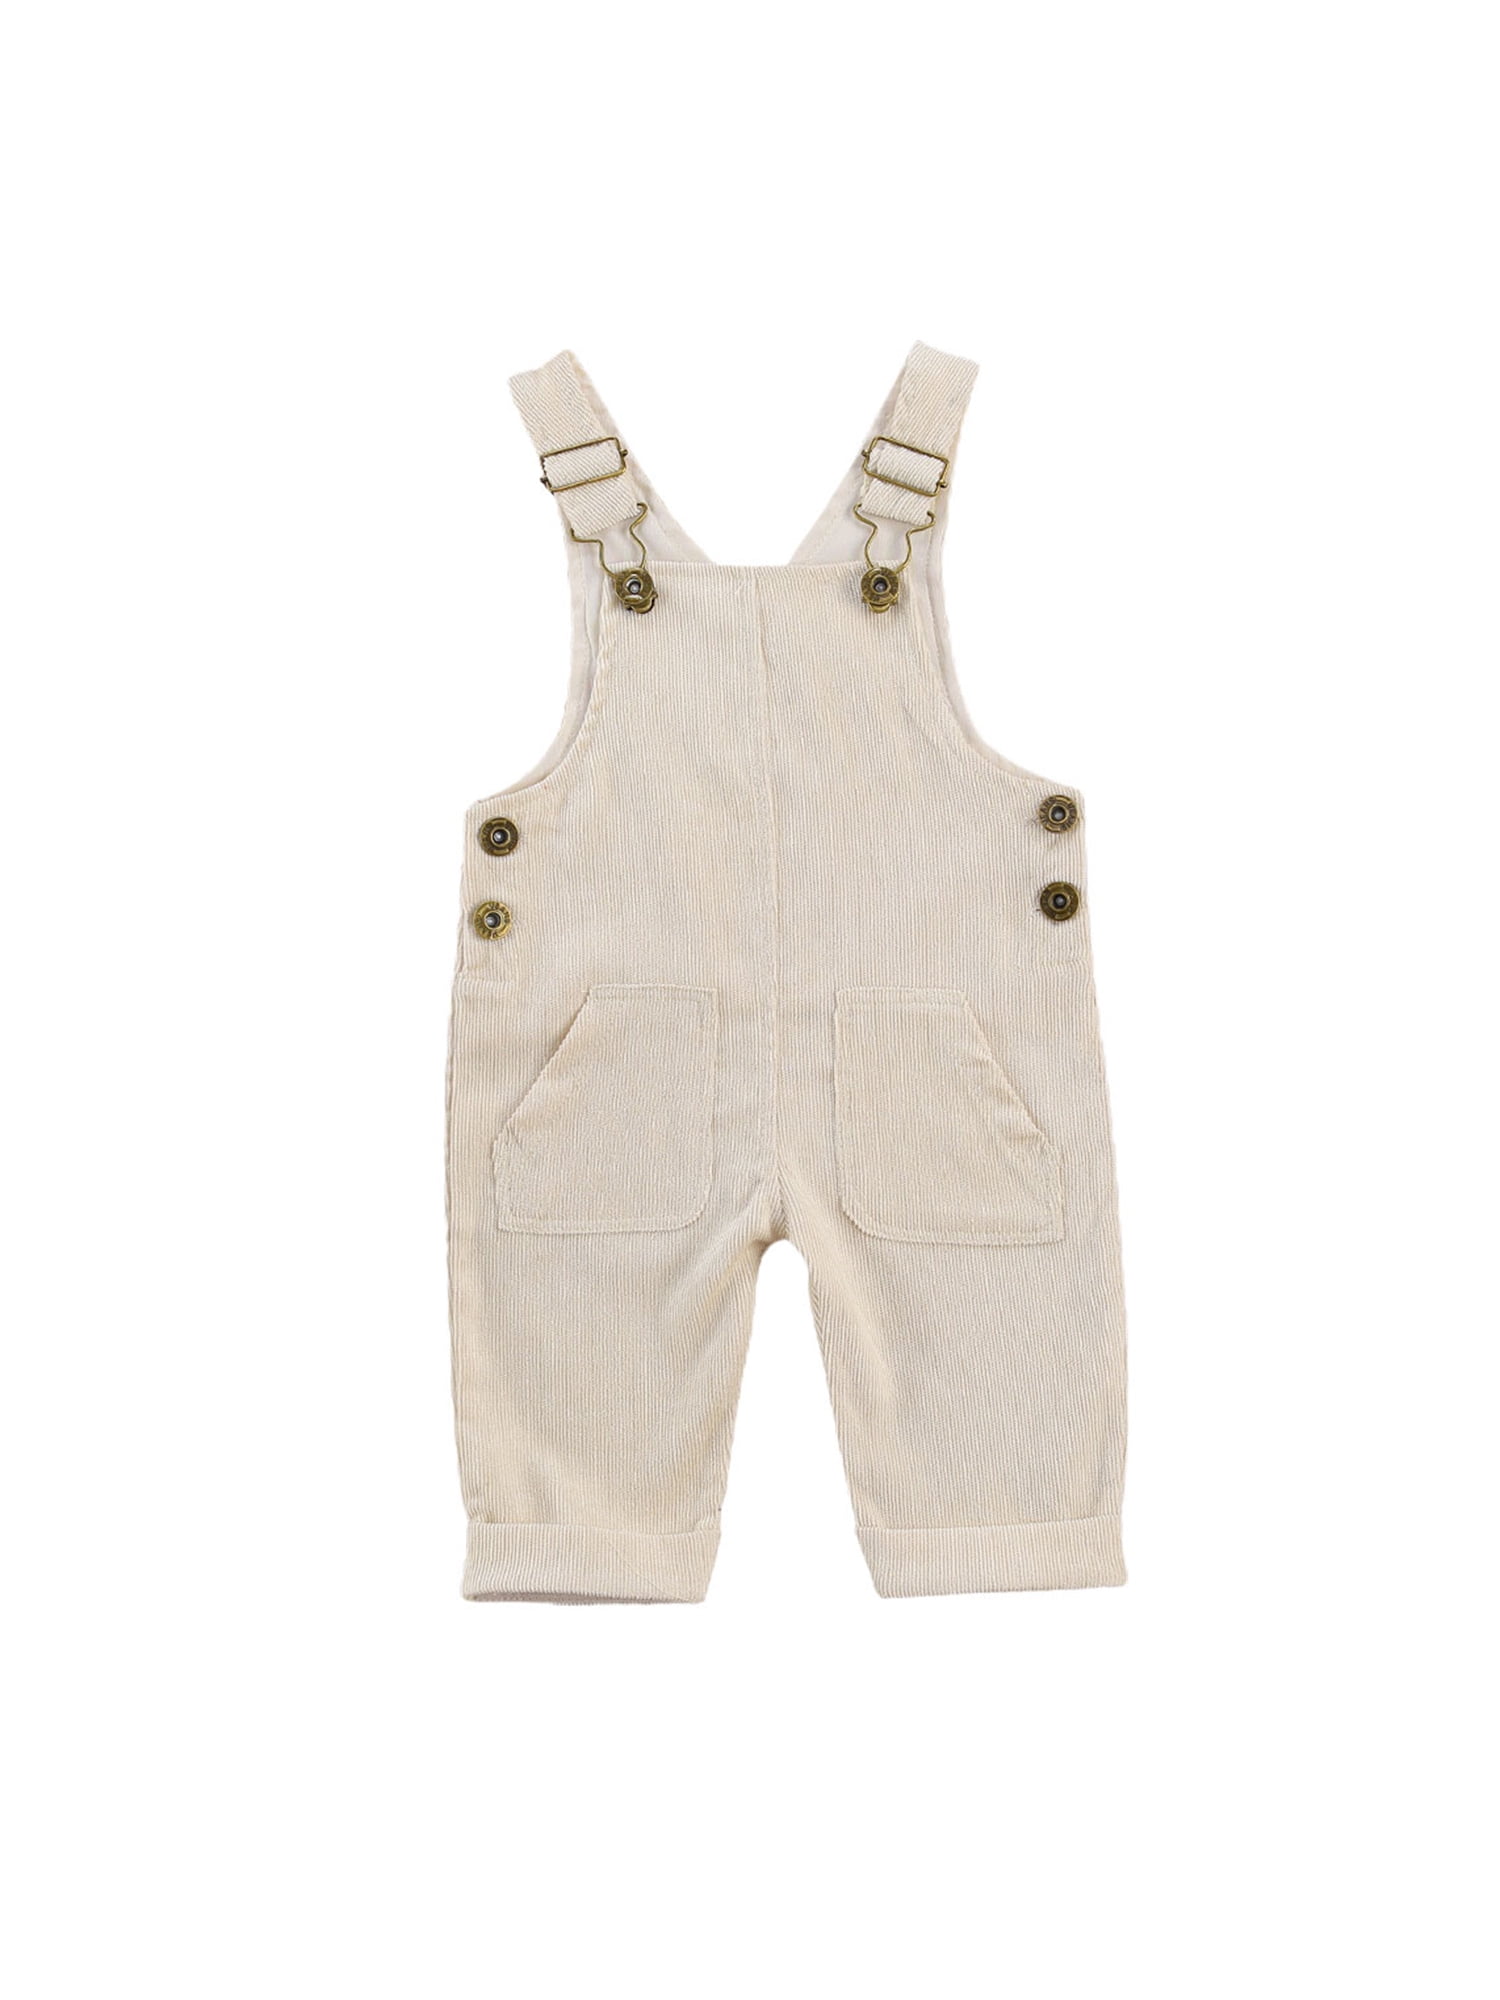 TiaoBug Baby Boys Girls' Corduroy Dungarees Overalls One-Piece Jumpsuit Suspender Trousers Bib Outfits